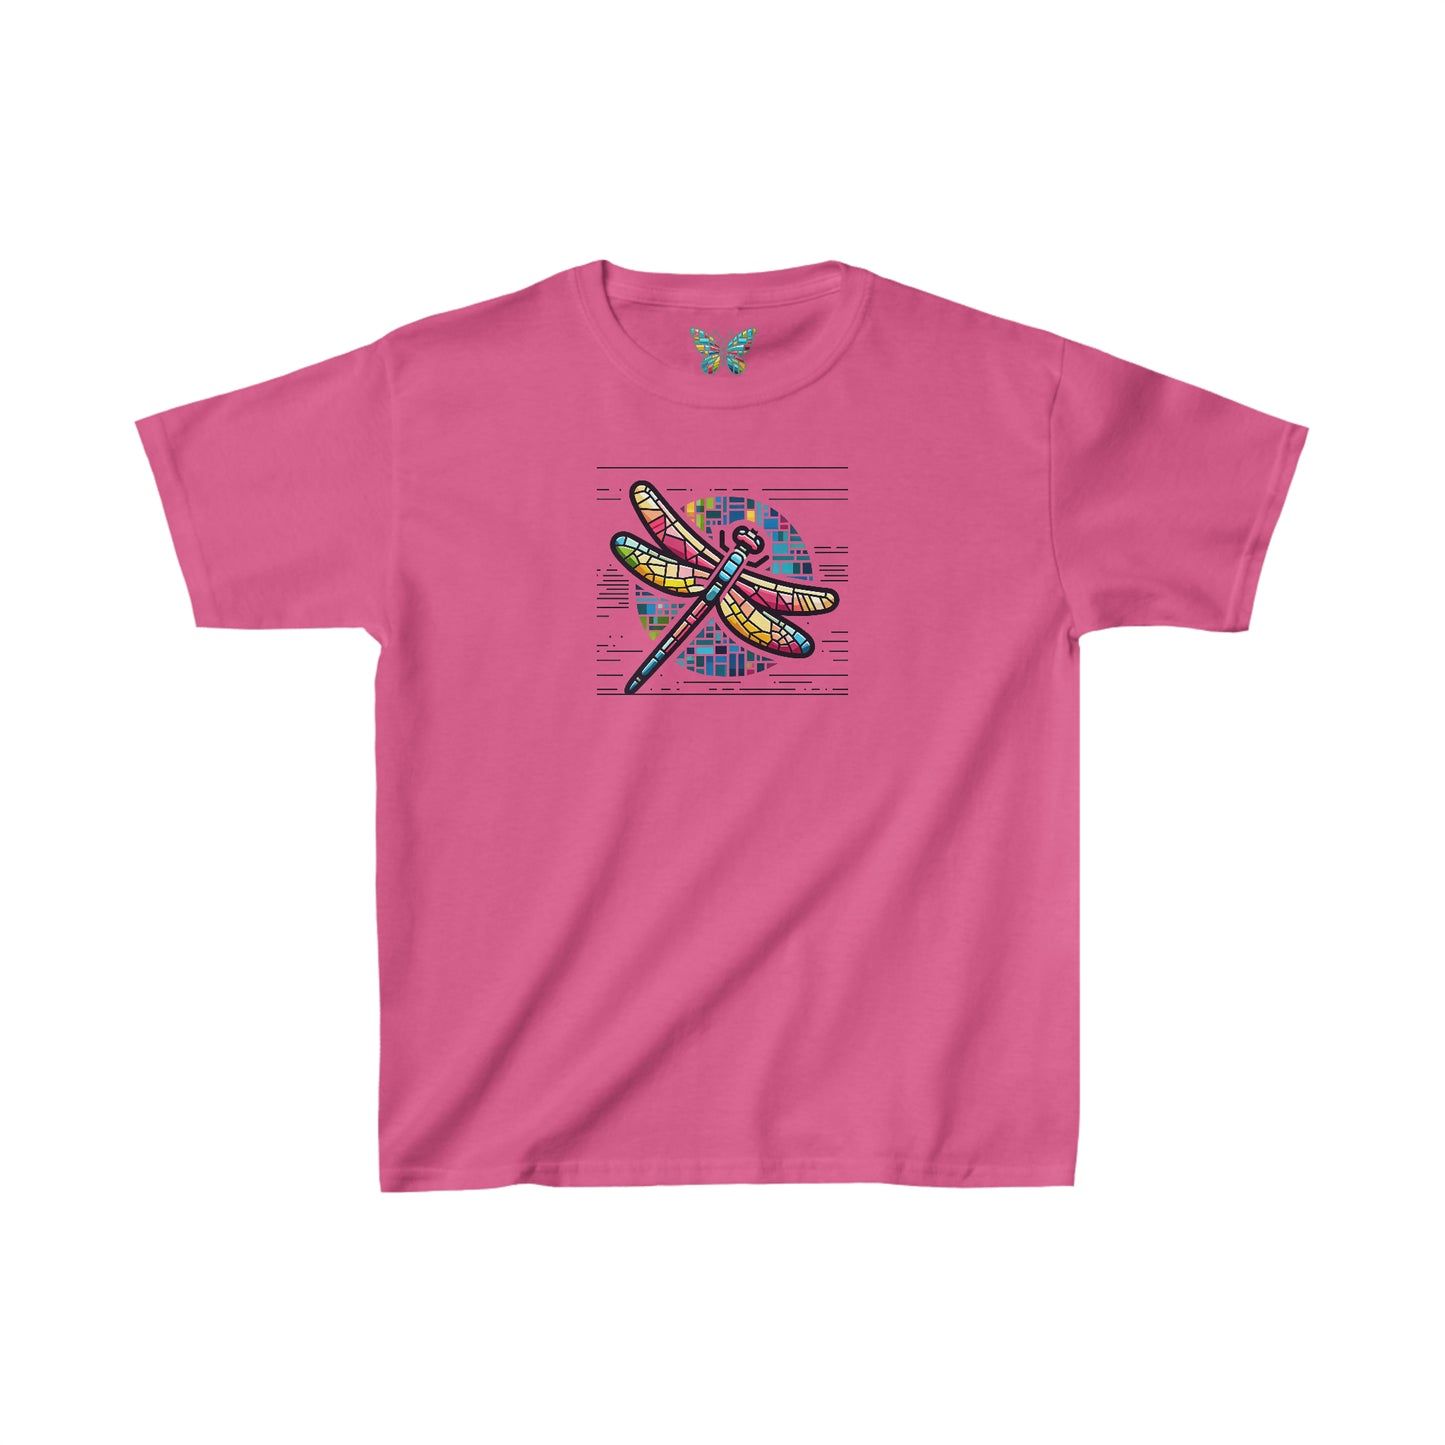 Dragonfly Dazzloresque - Youth - Snazzle Tee